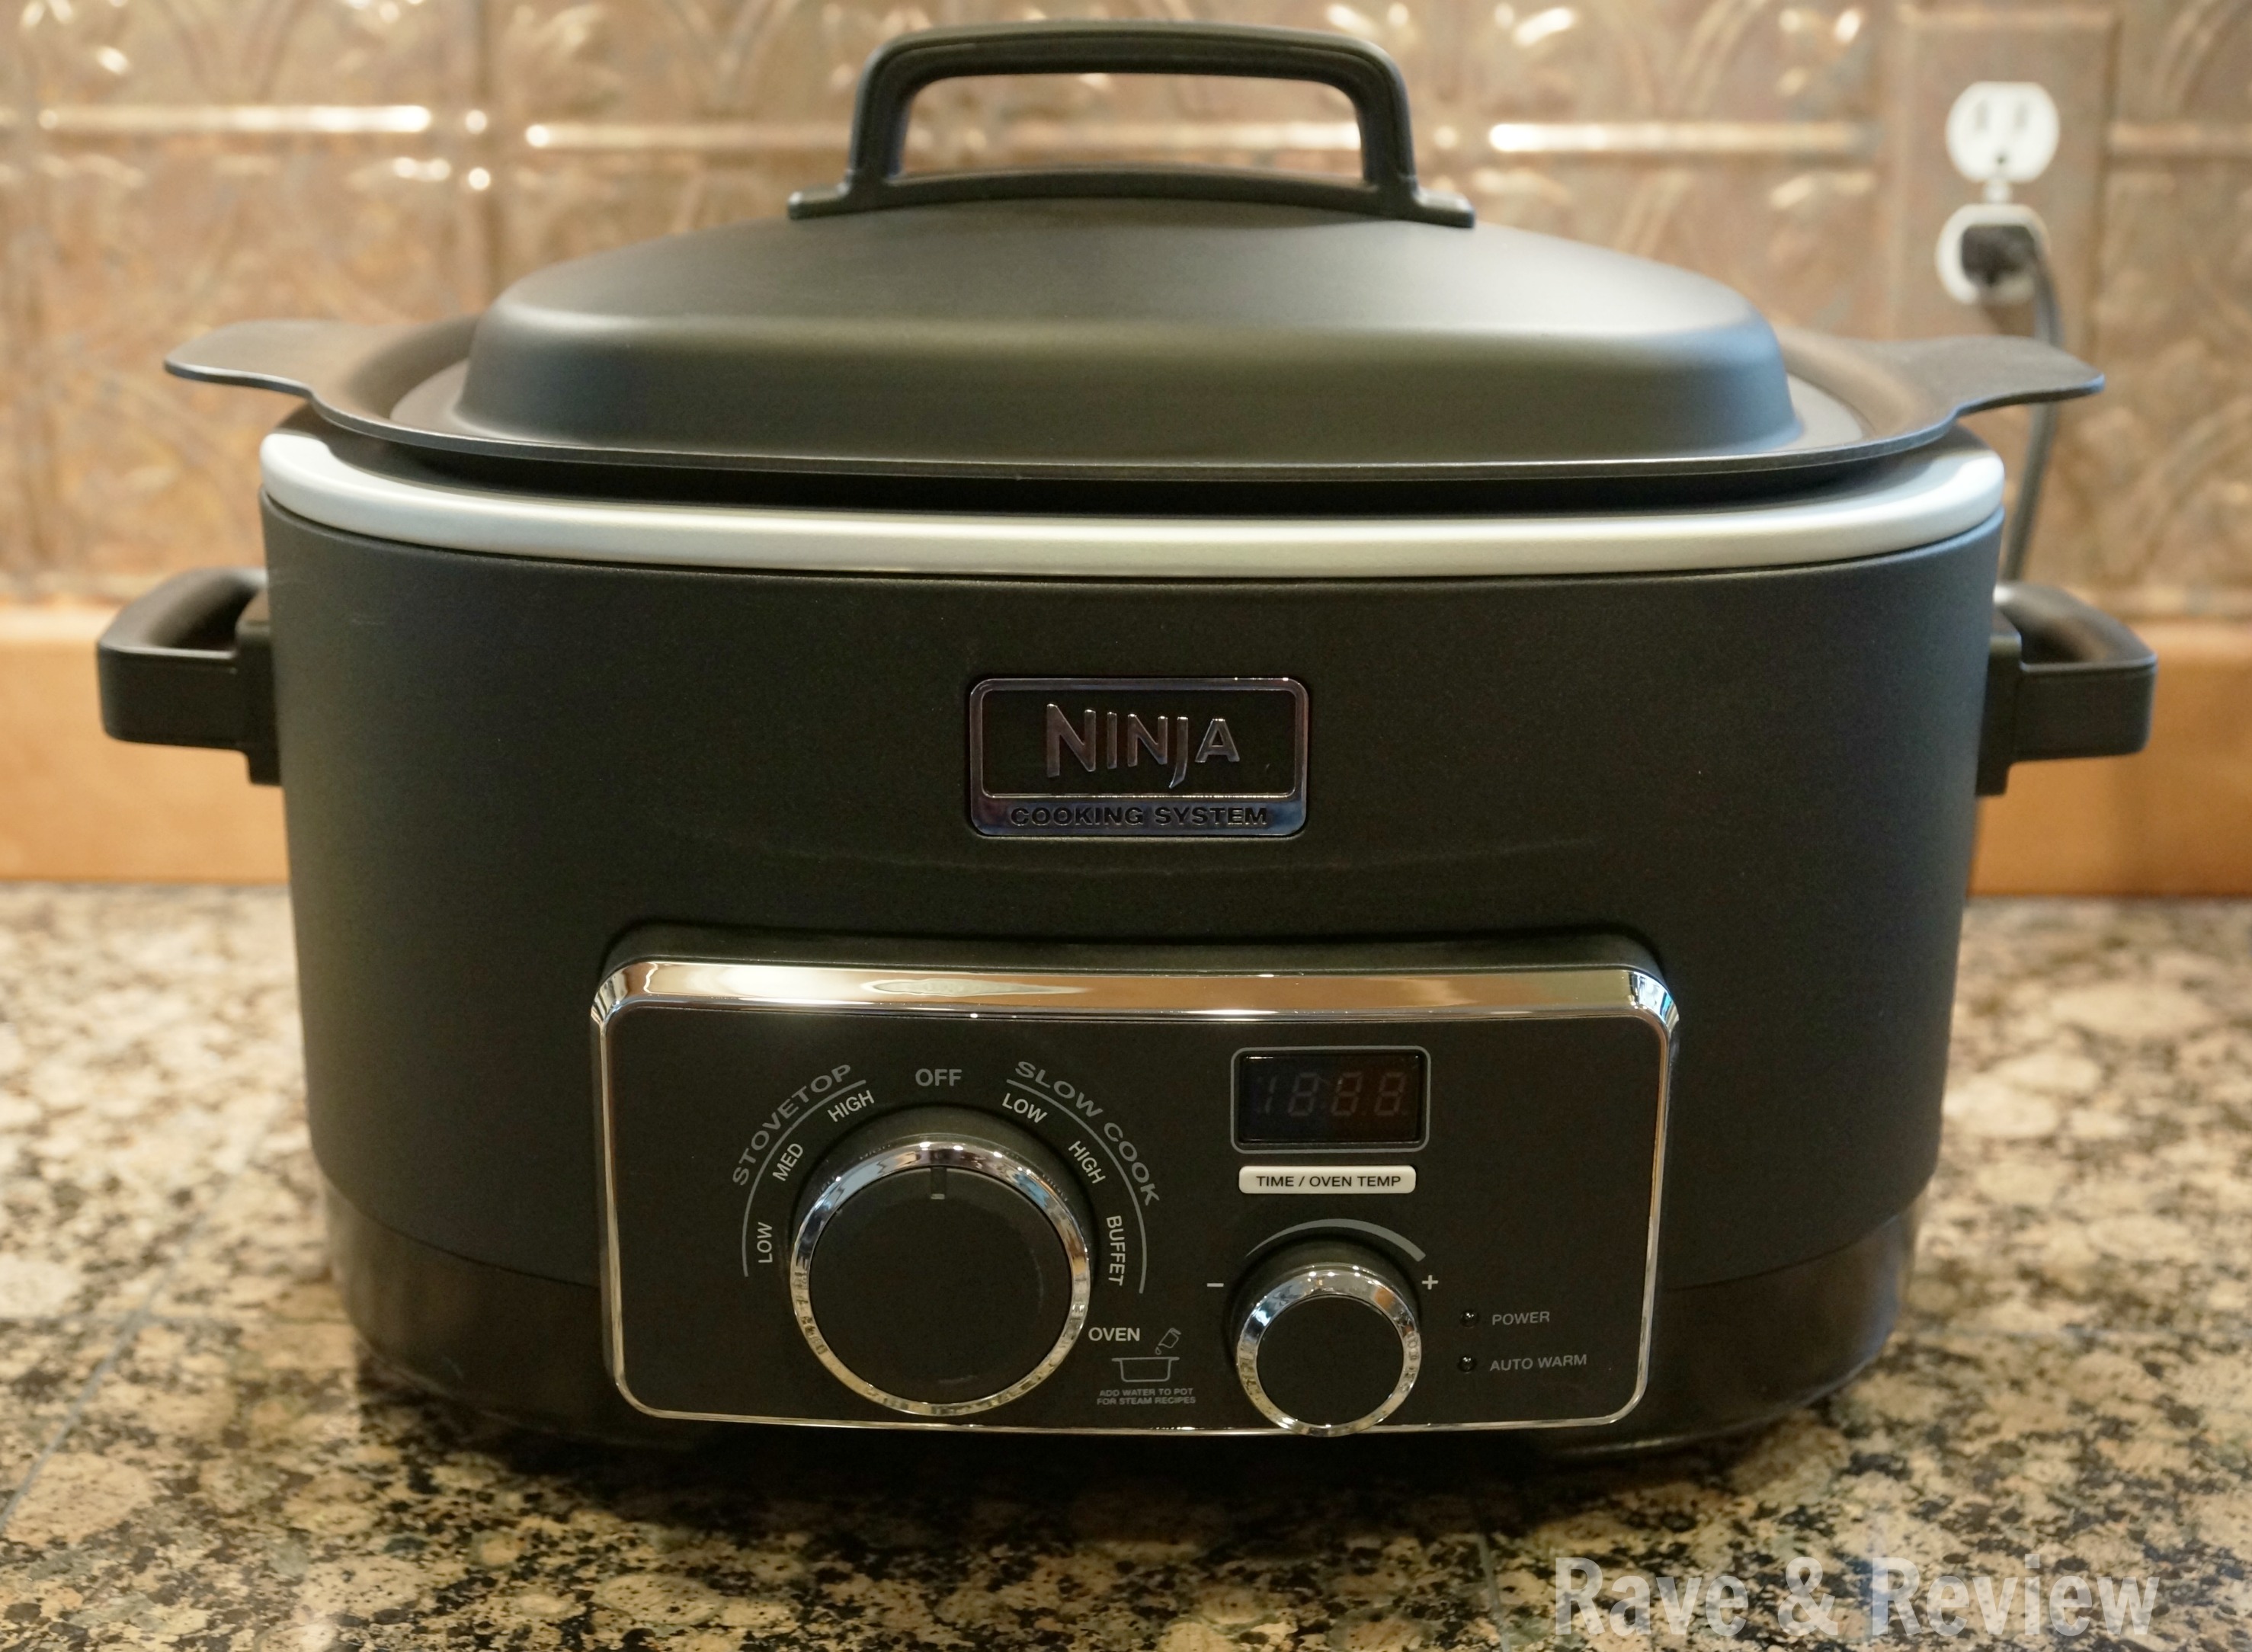 Why I love the Ninja 3-in-1 cooking system